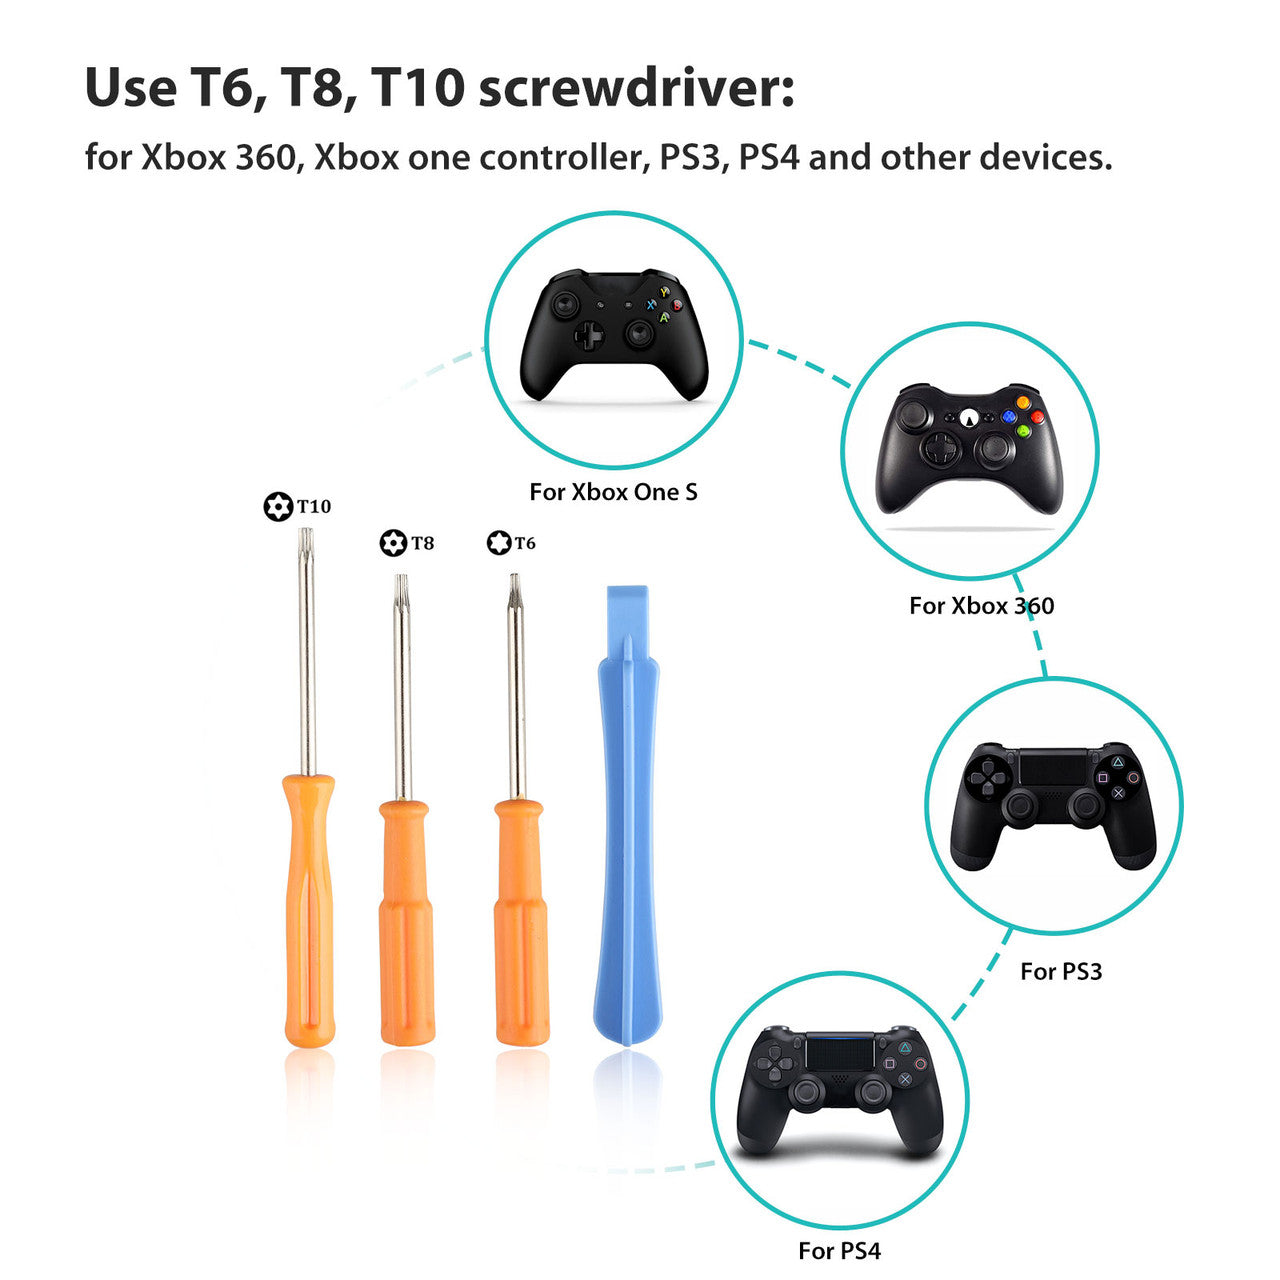 3.5mm Headphone Headset Jack Replacement + T6 T8 T10 Screwdrivers Repair Tool Compatible with Xbox One Controller, Xbox 360, Playstation 3 PS3 PS4, 3Pcs